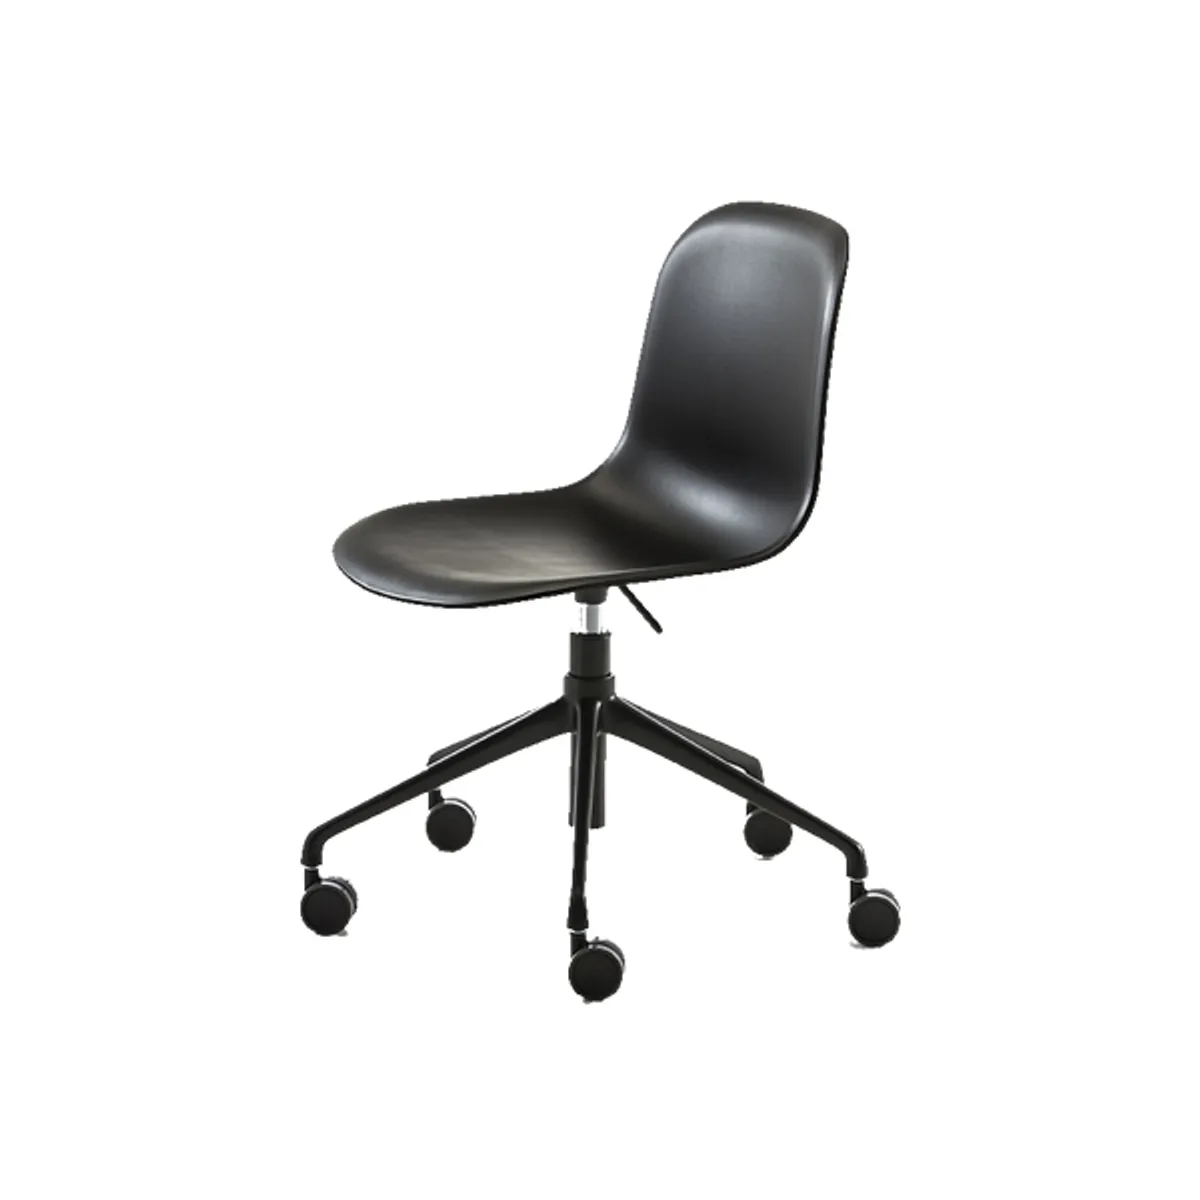 Manipolytrestlesidechair Inside Out Contracts2